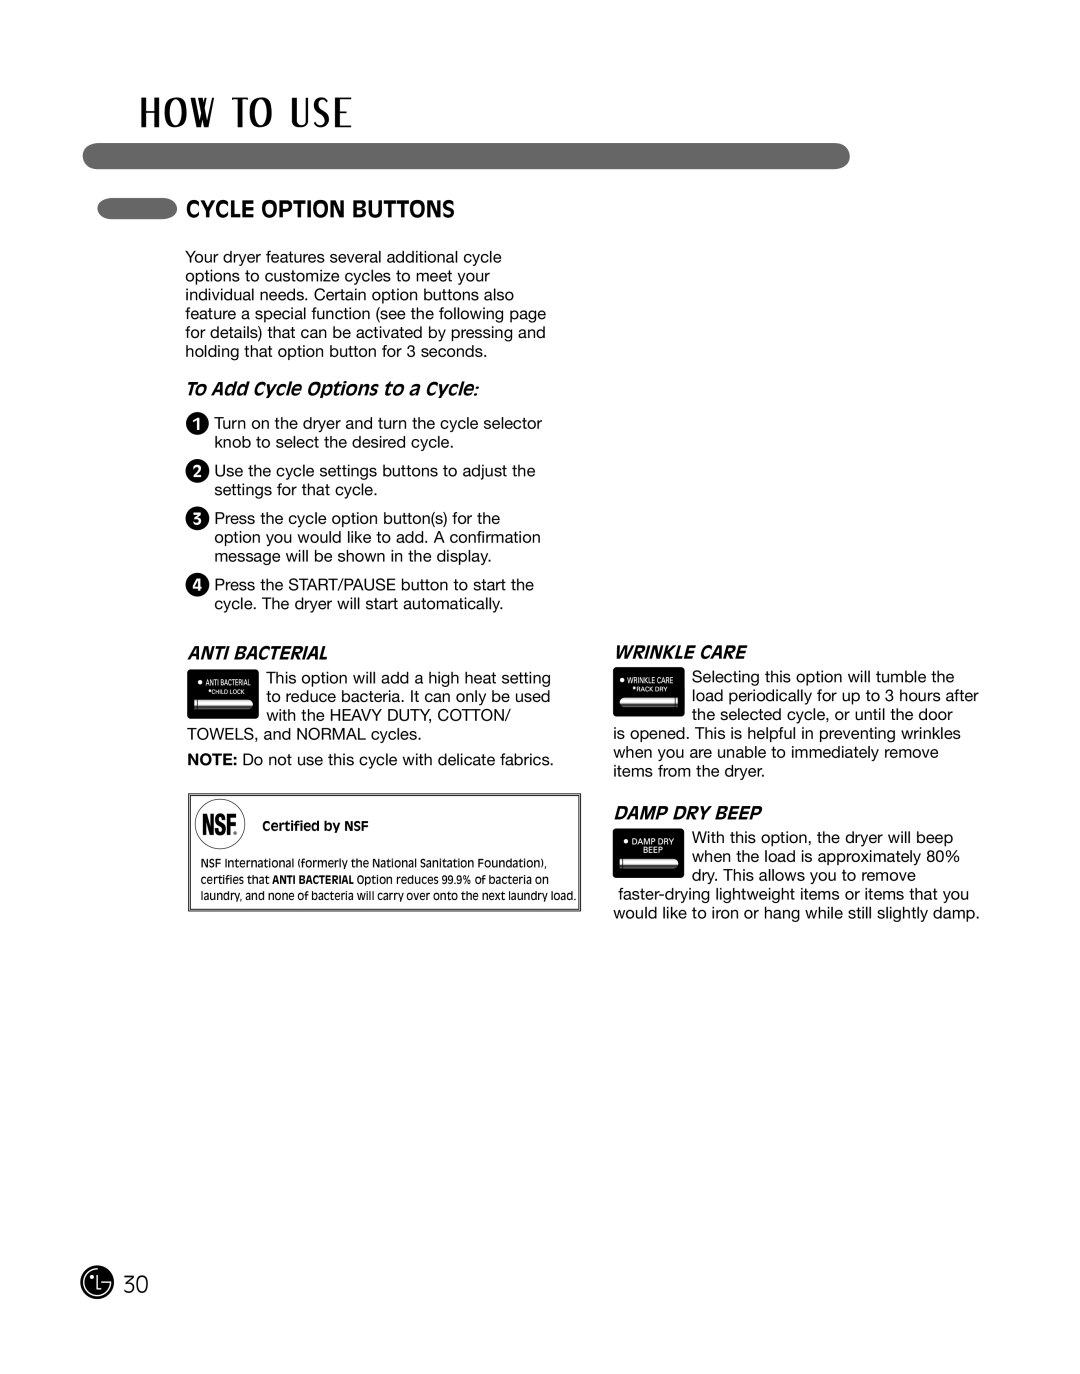 LG Electronics P154 Cycle Option Buttons, To Add Cycle Options to a Cycle, Anti Bacterial, Wrinkle Care, Damp Dry Beep 